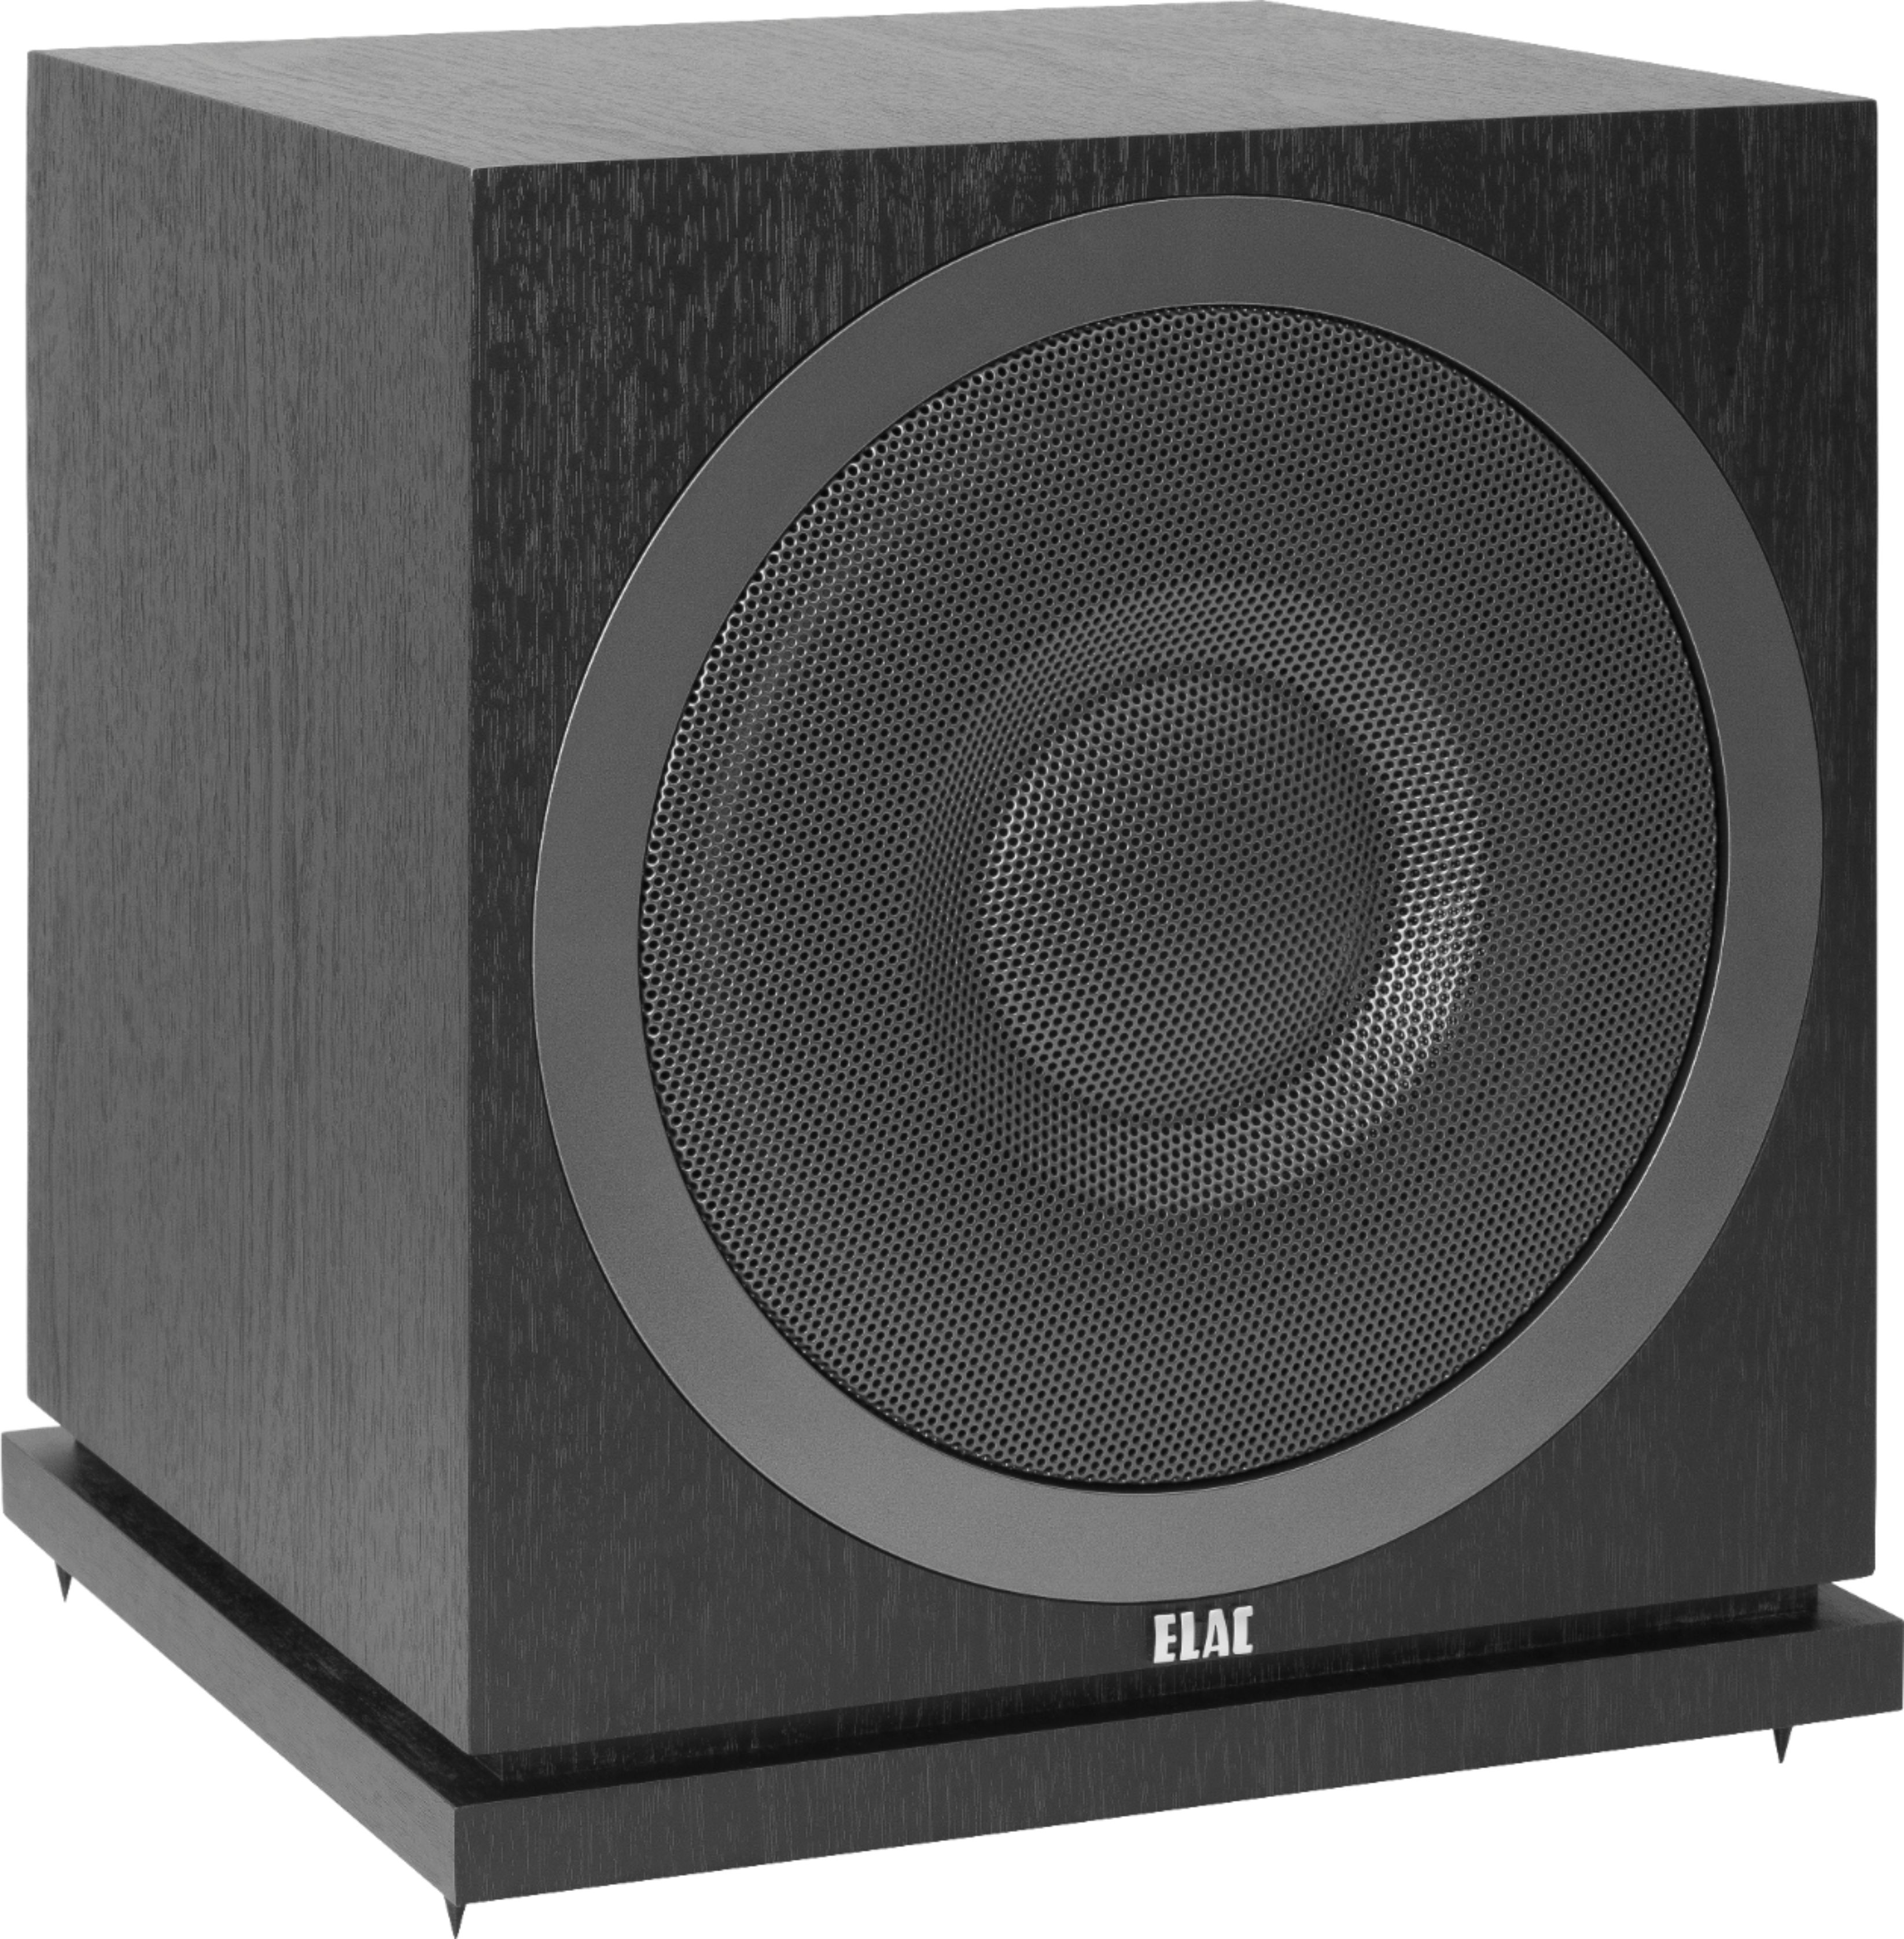 Angle View: BIC America - 12" 500W Powered Subwoofer - Black Lacquer